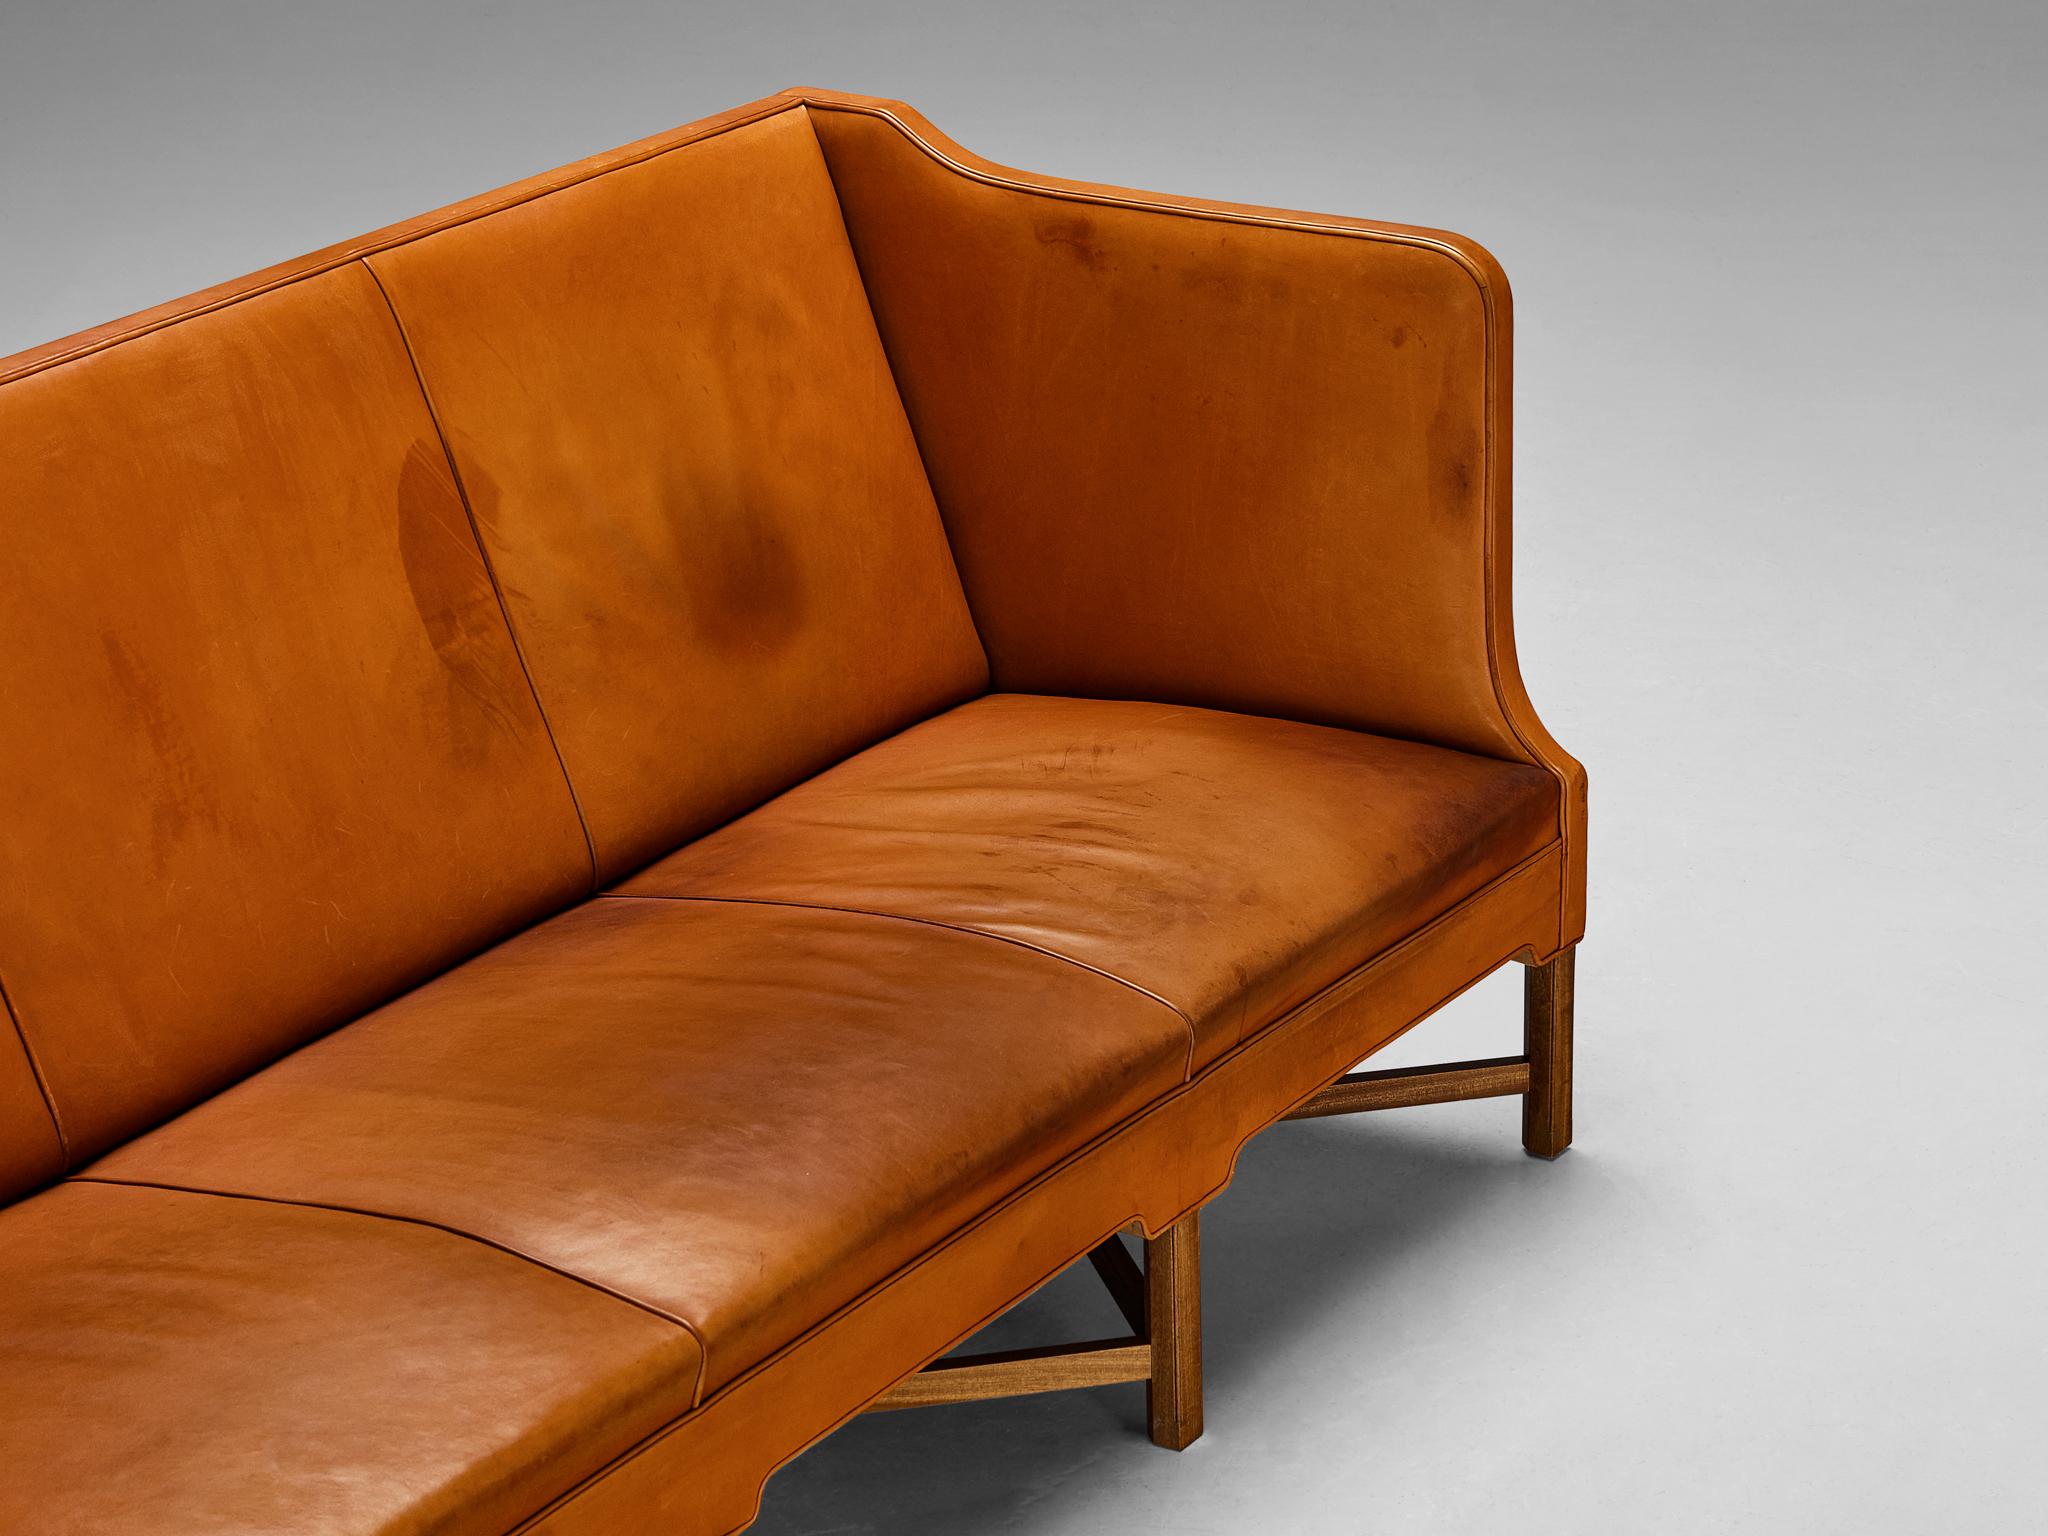 Kaare Klint for Rud. Rasmussen Sofa Model 4118 in Leather and Mahogany  For Sale 3